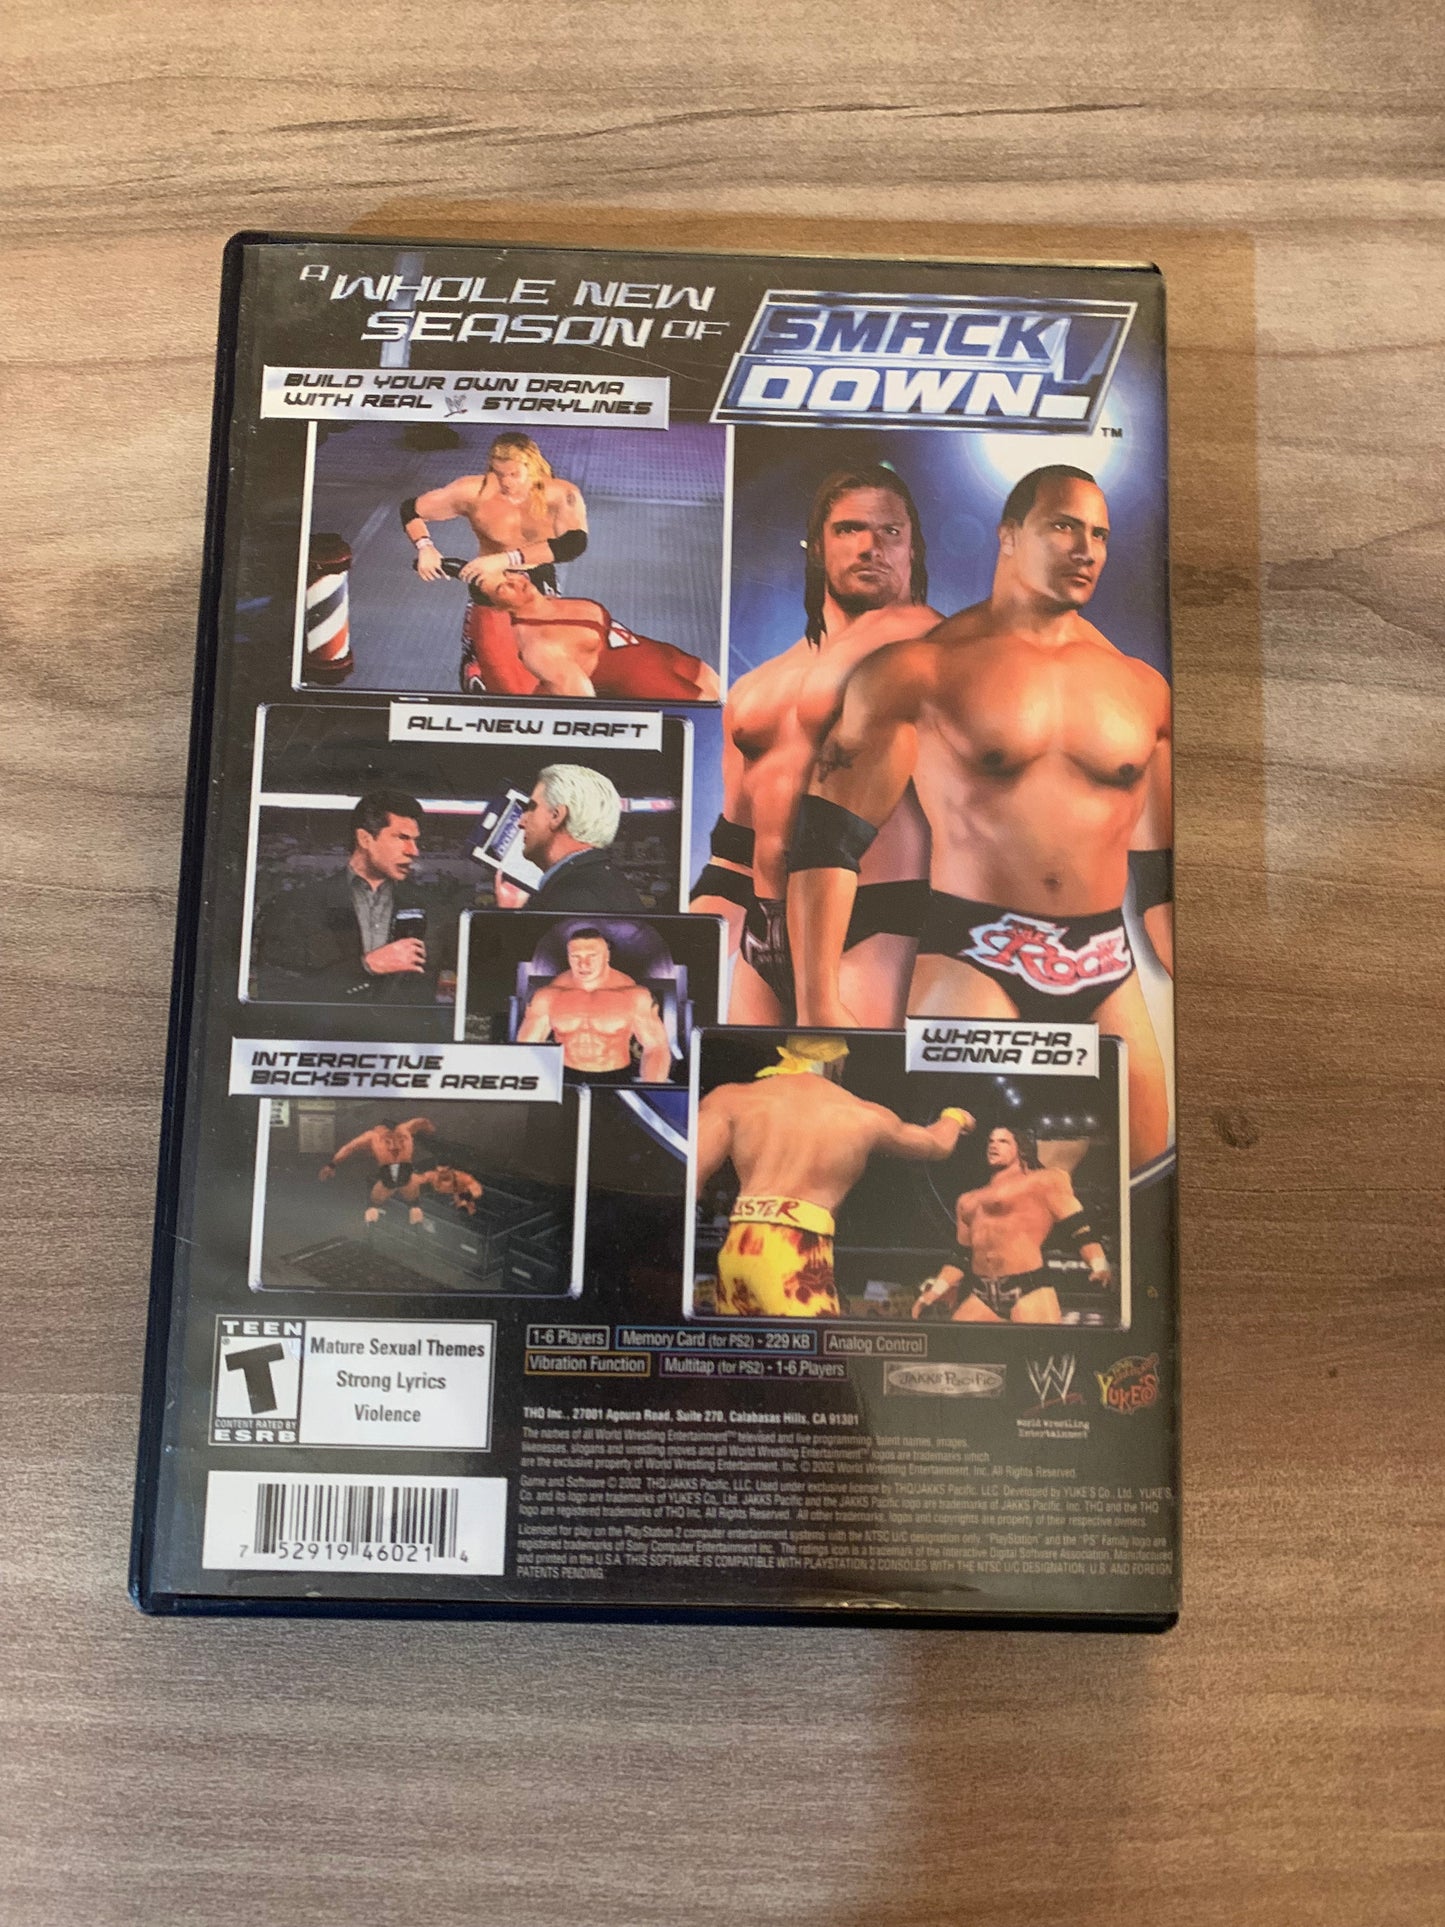 SONY PLAYSTATiON 2 [PS2] | WWE SMACKDOWN SHUT YOUR MOUTH